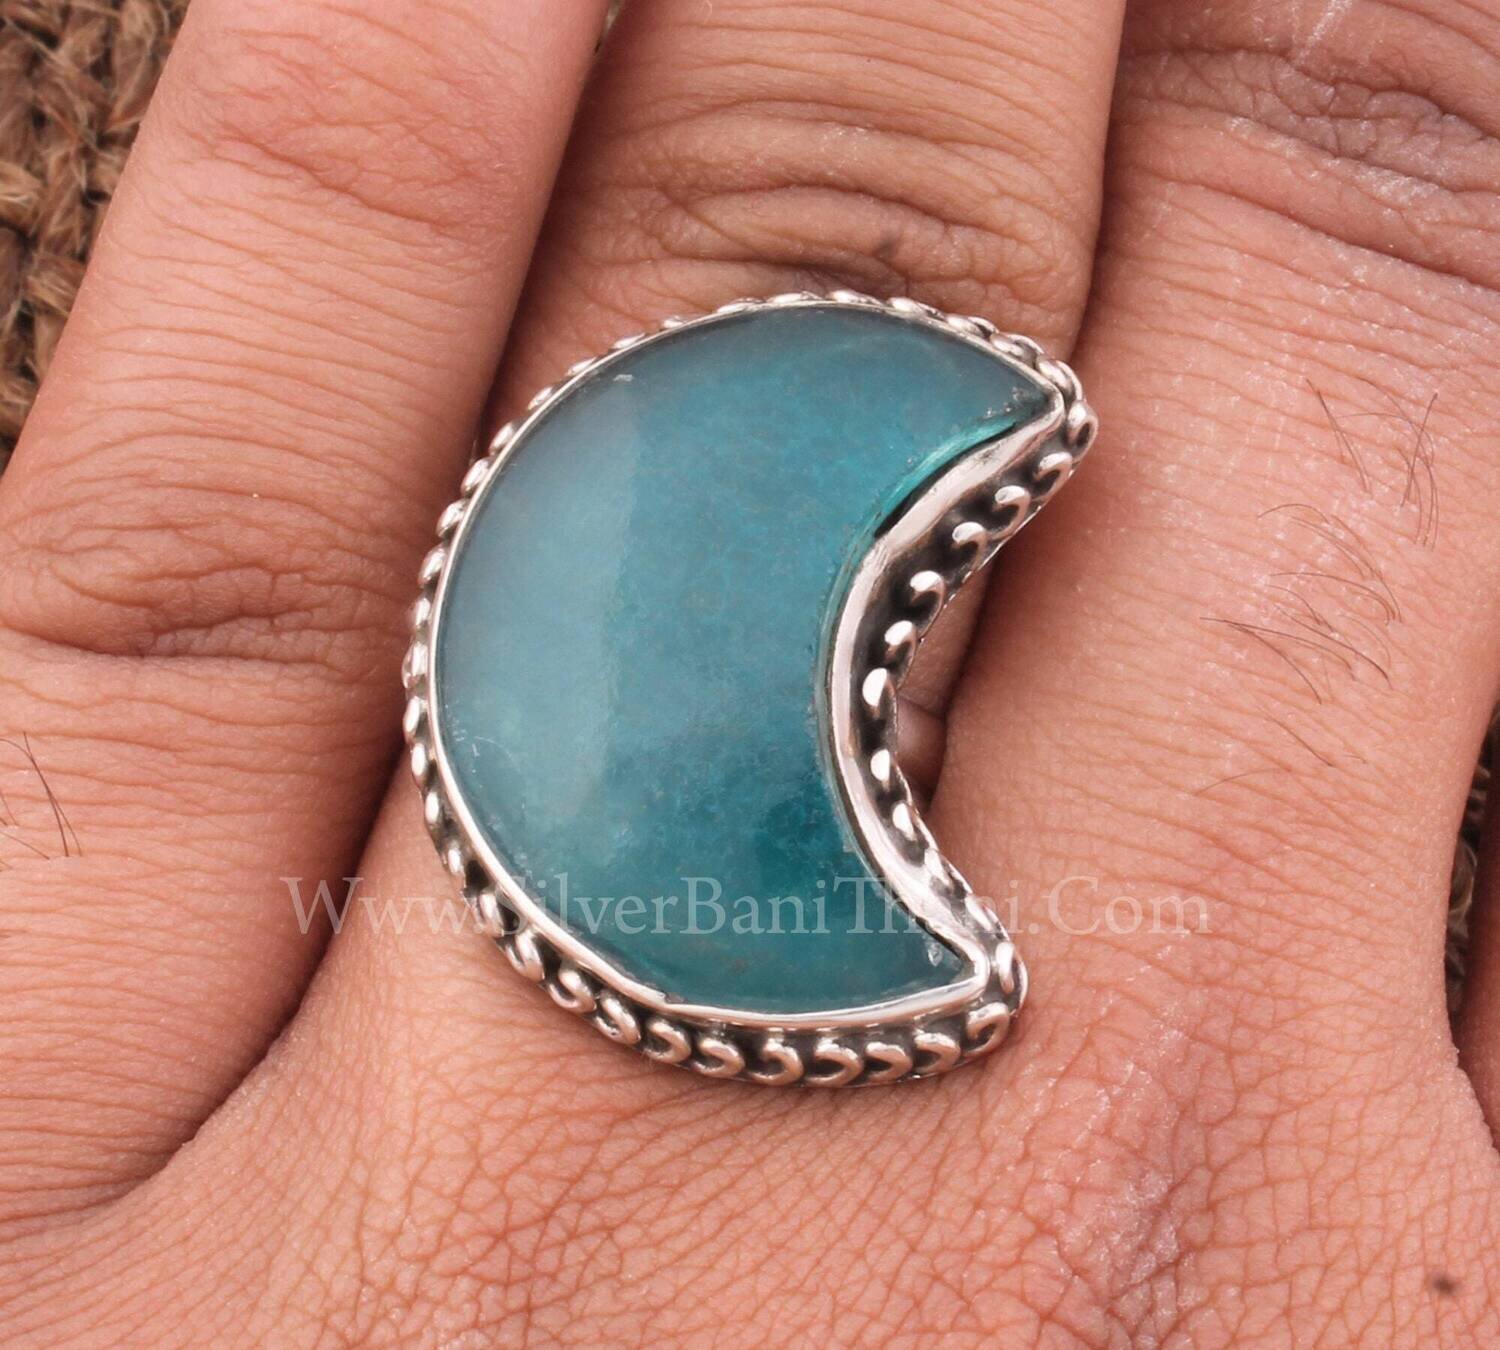 Blue Jade Gemstone Silver Ring | 925 Sterling Silver Smooth Stone Ring | Handmade Crescent Moon Shape Gemstone Ring | Present For Her Gift